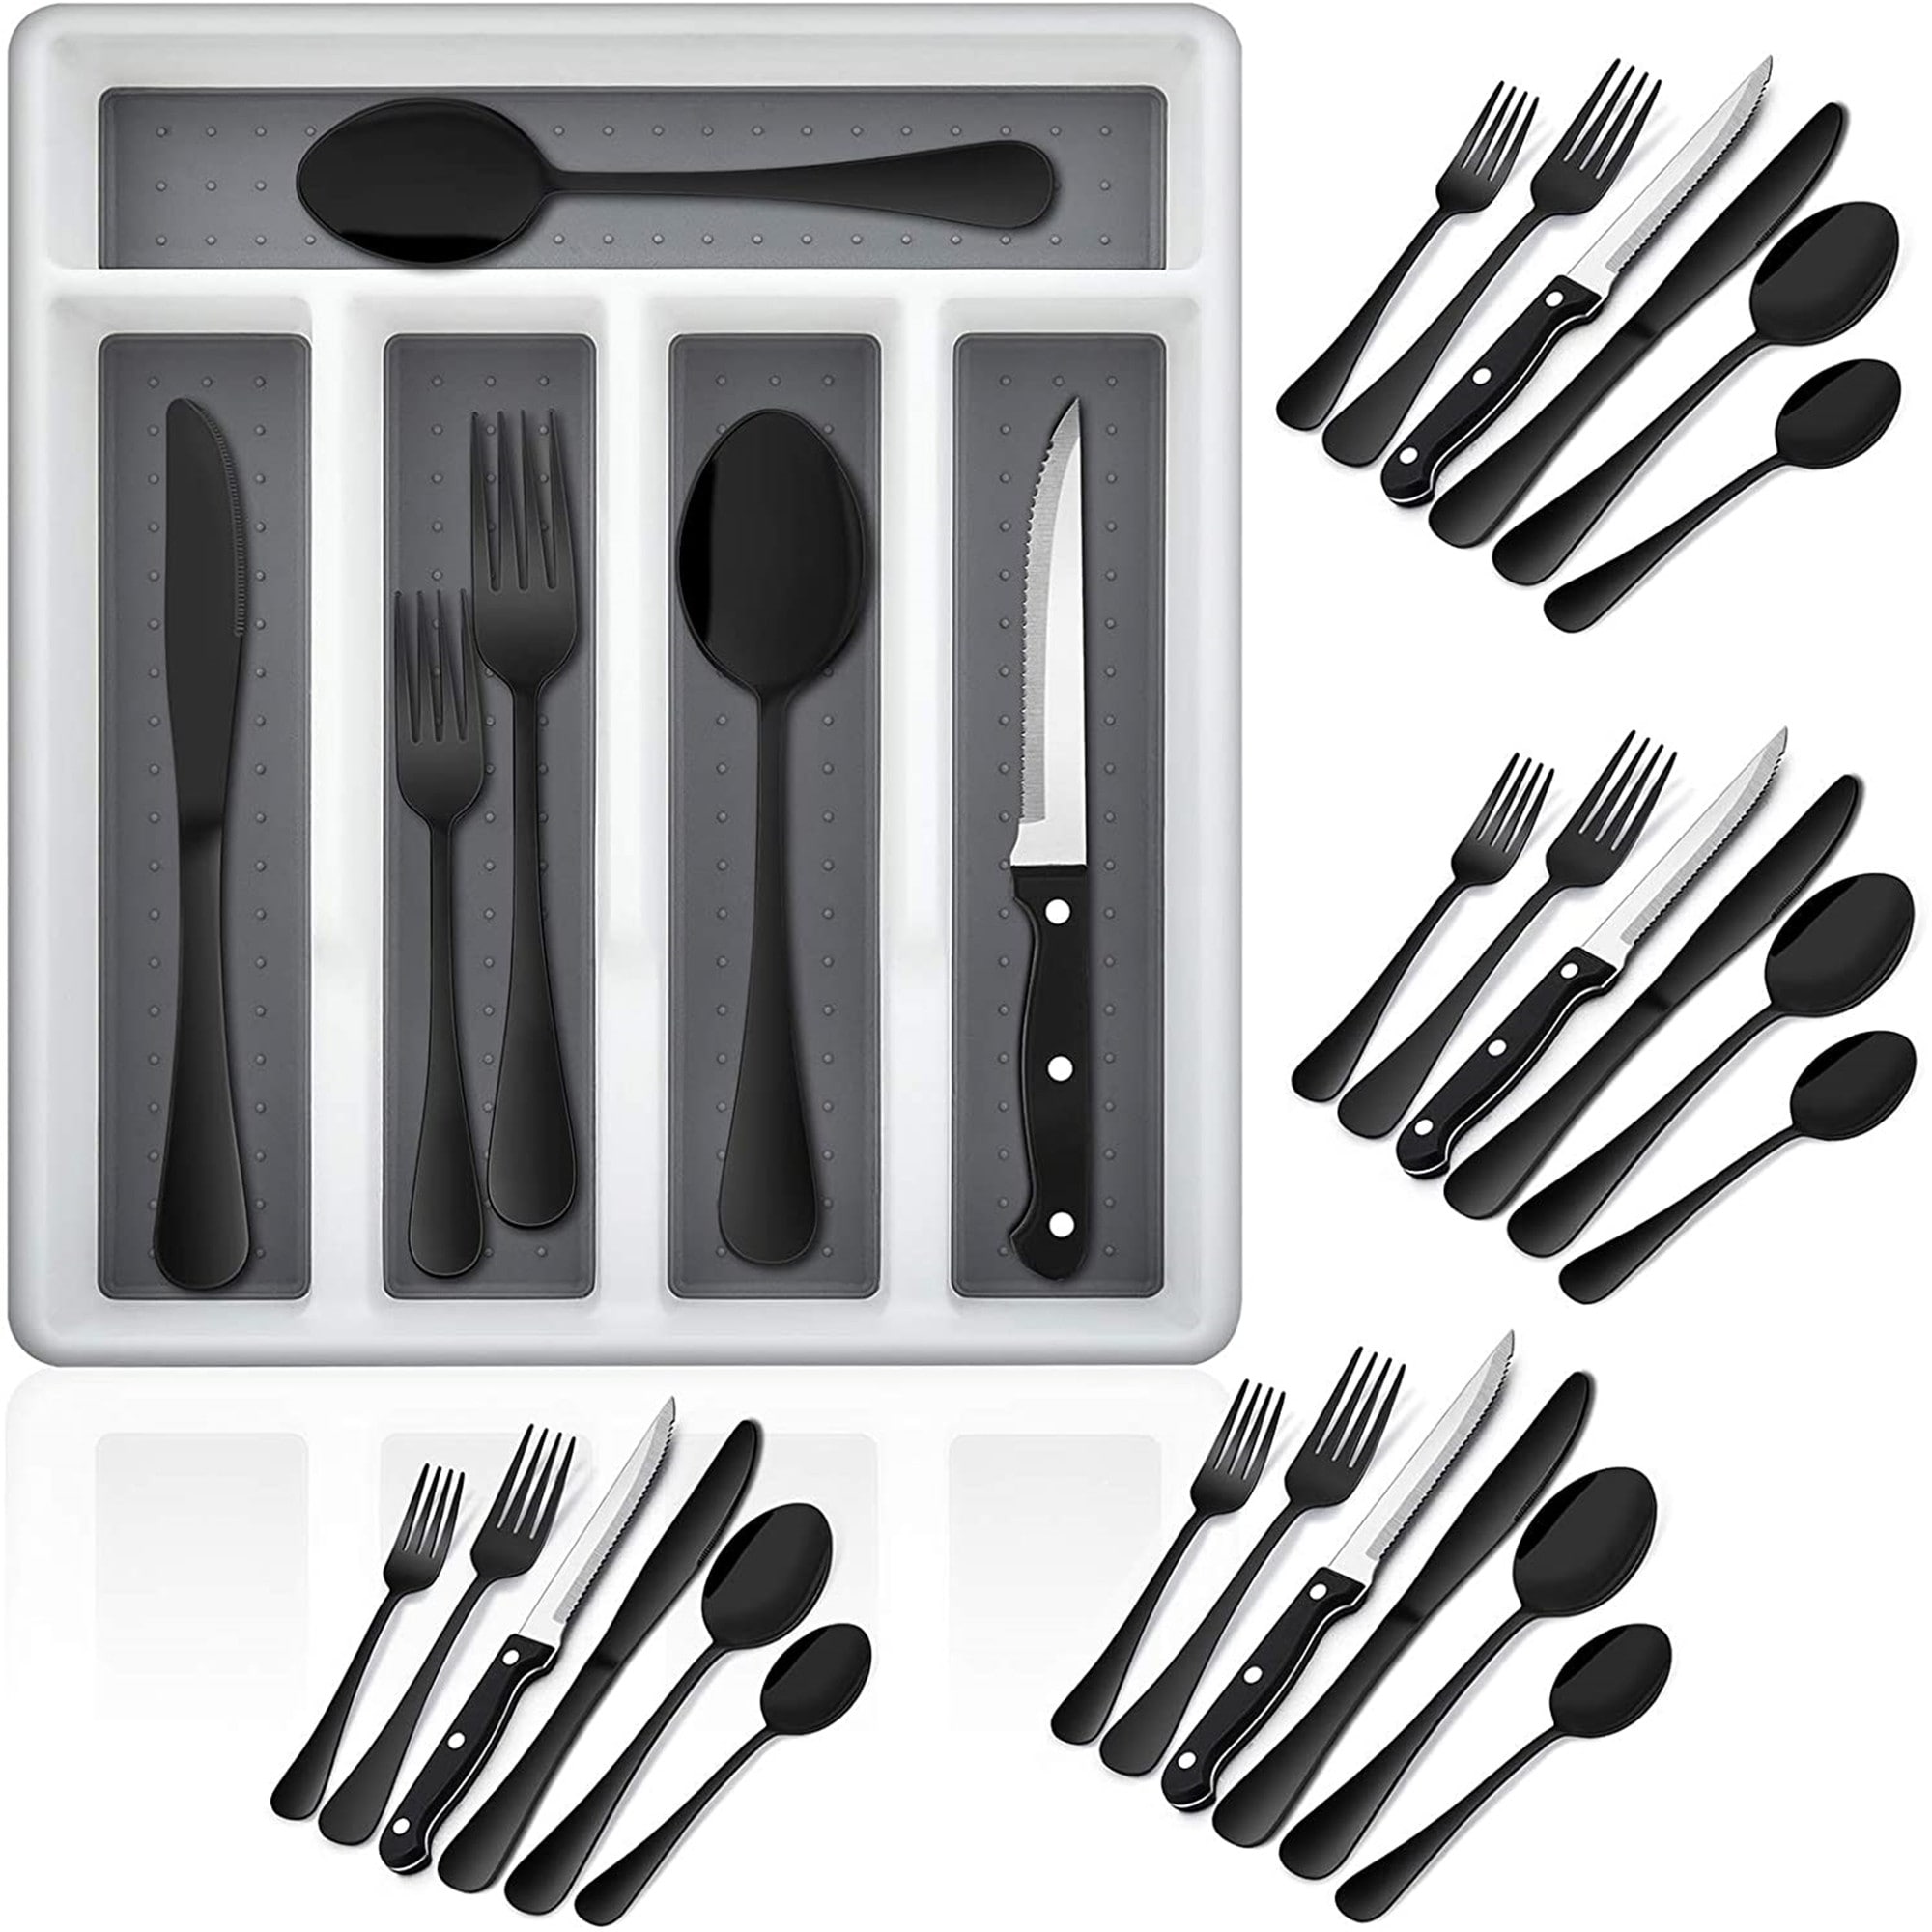 https://ak1.ostkcdn.com/images/products/is/images/direct/339dc7c8699bcefbcfa9210365240ad3c690cc62/24-Piece-Silverware-Set-with-Steak-Knives-and-Organizer-Tray%2C-Stainless-Steel-Flatware%2C-Mirror-Polished%2C-Dishwasher-Safe.jpg